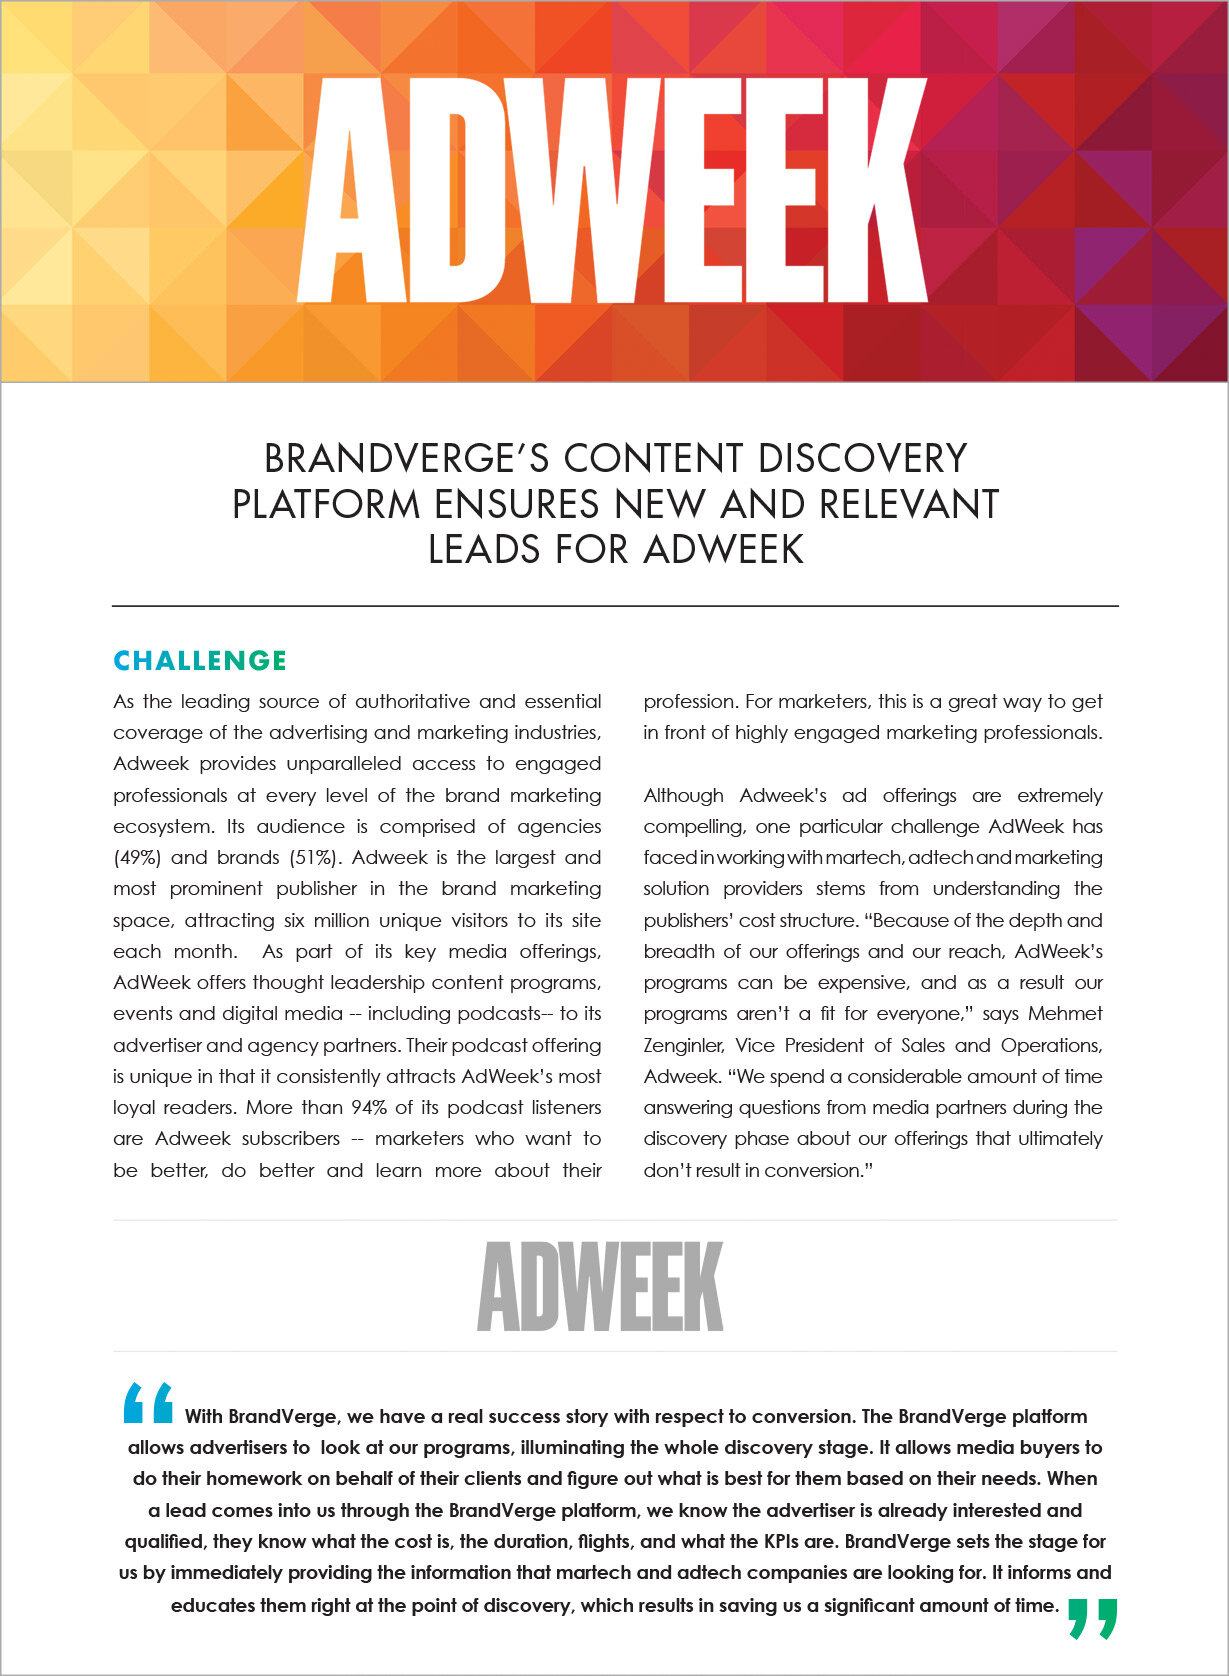 Brandvege’s Content Discovery Platform Ensures New and Relevant Leads for Adweek